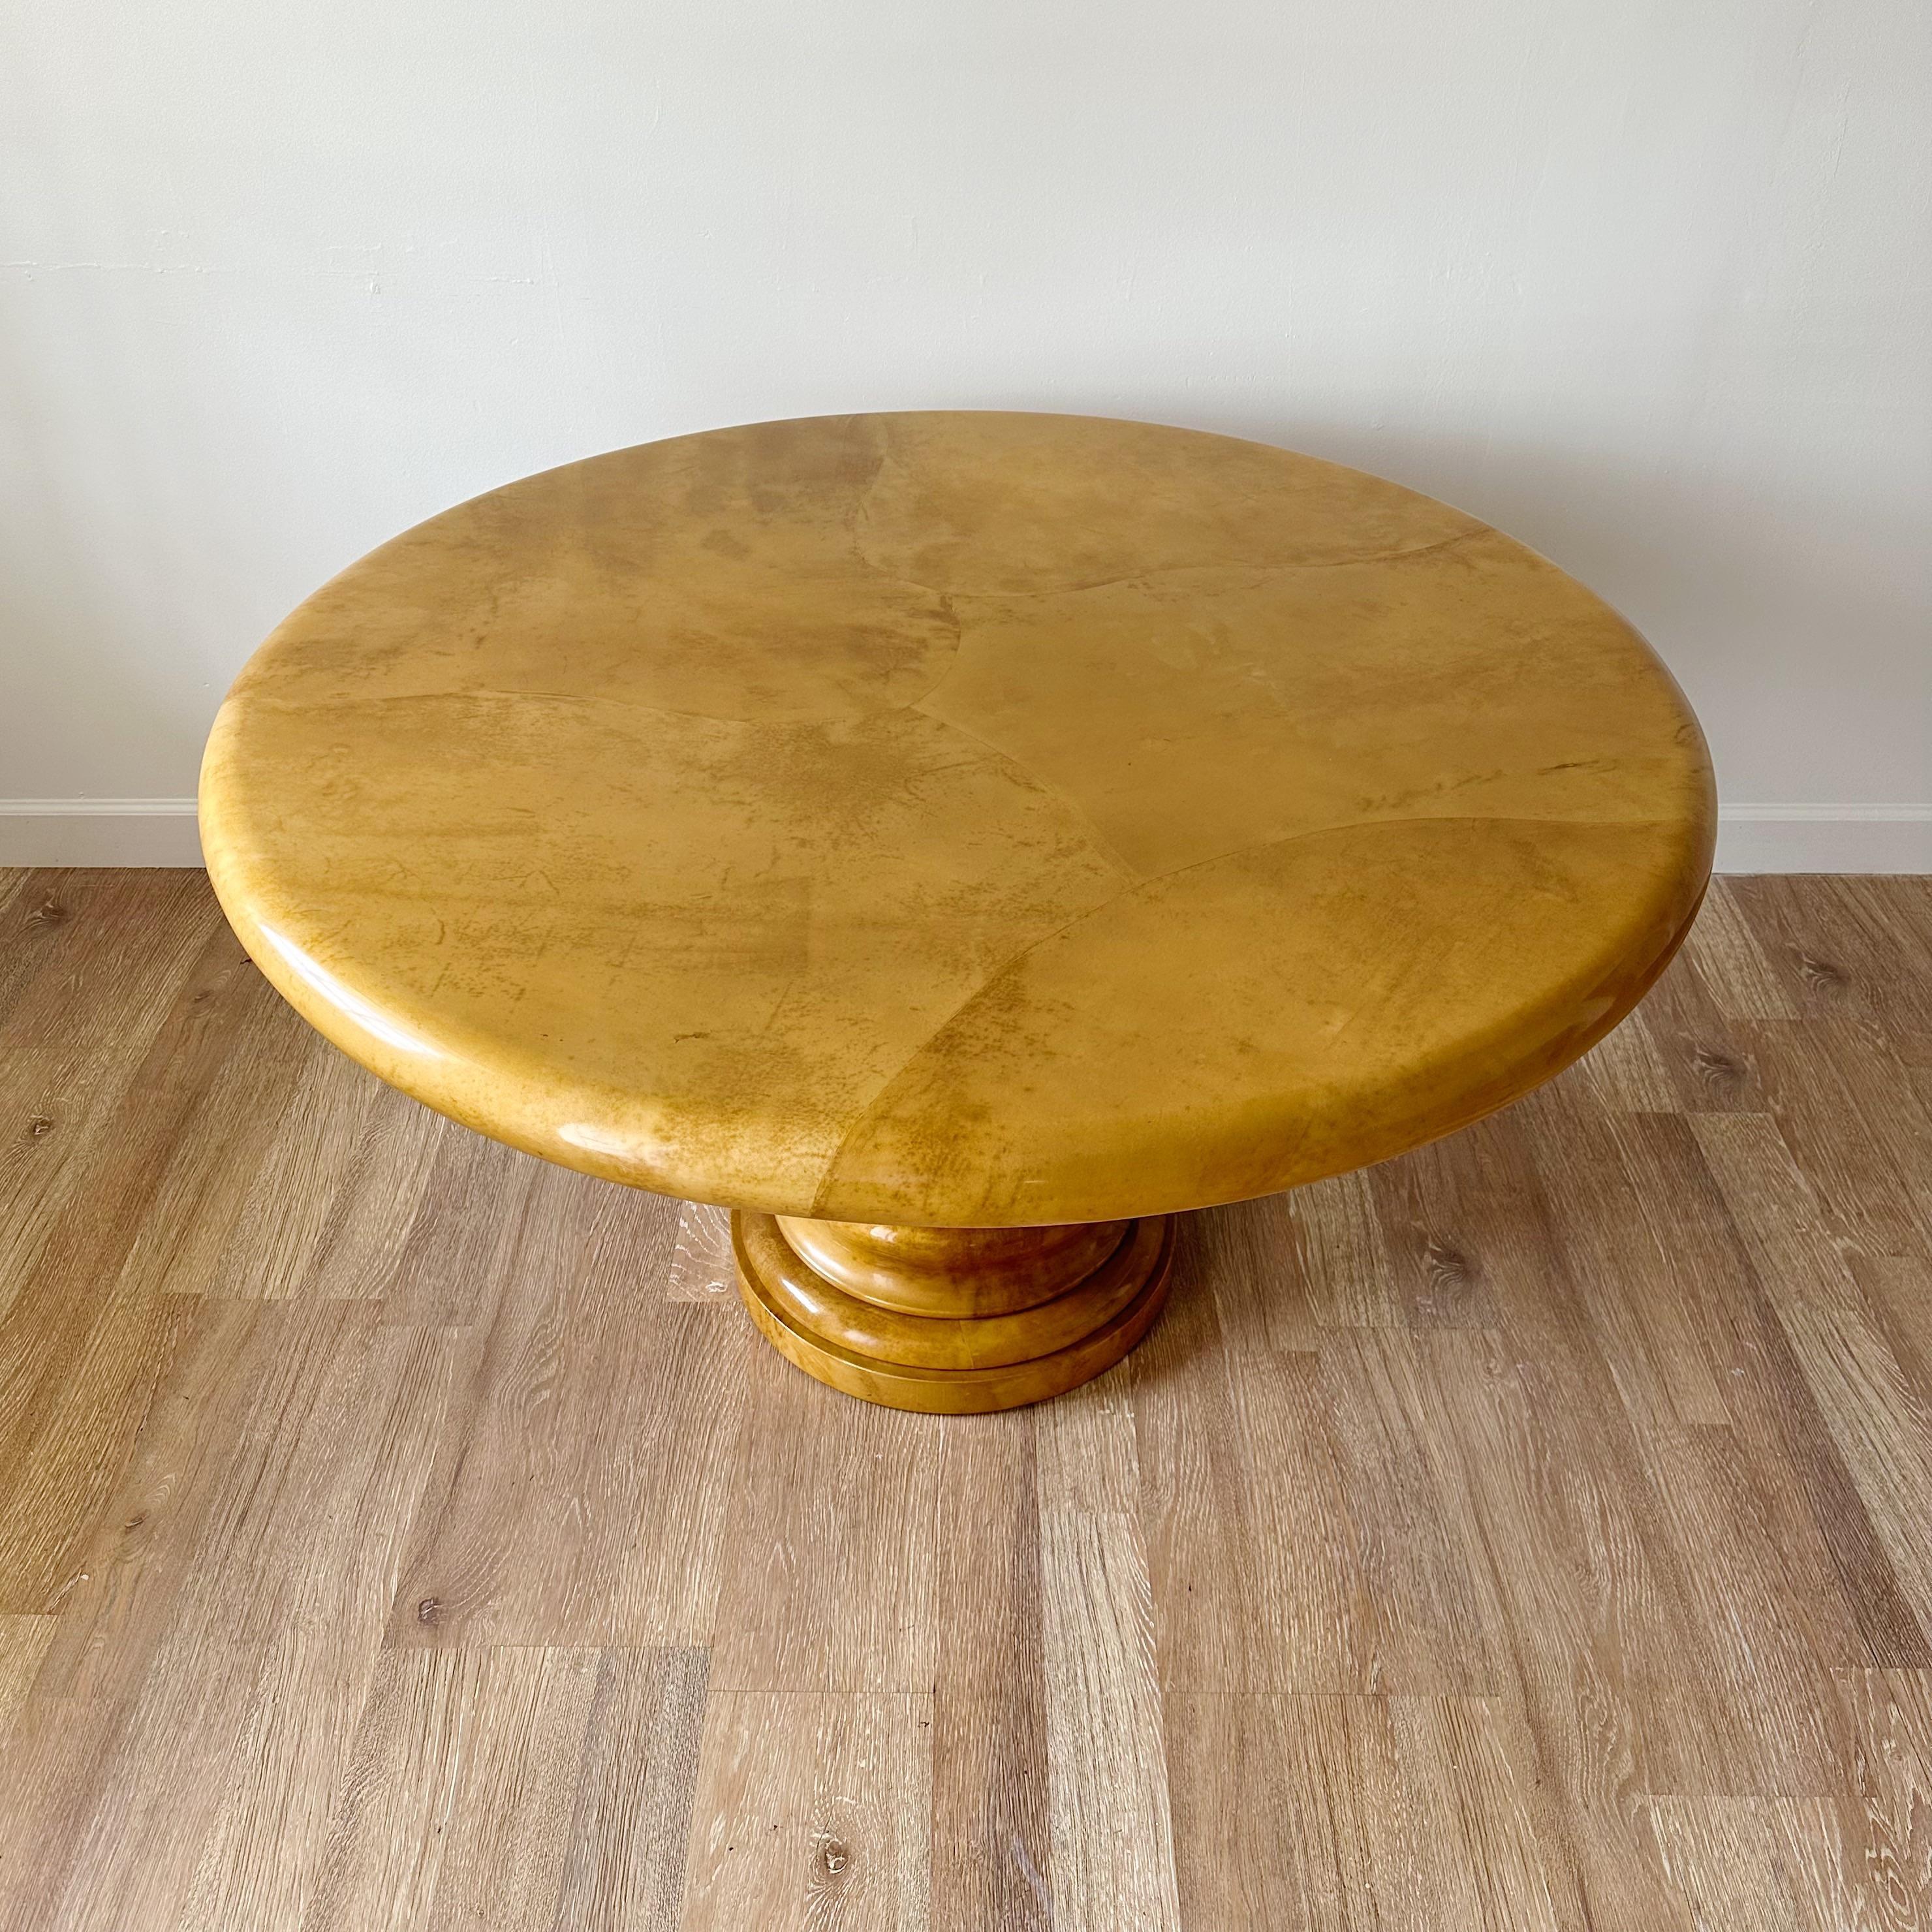 Jimeco parchment center table with circular goatskin top and pedestal with parchment overlay. Vintage item from the 1980s, original label underneath reads 